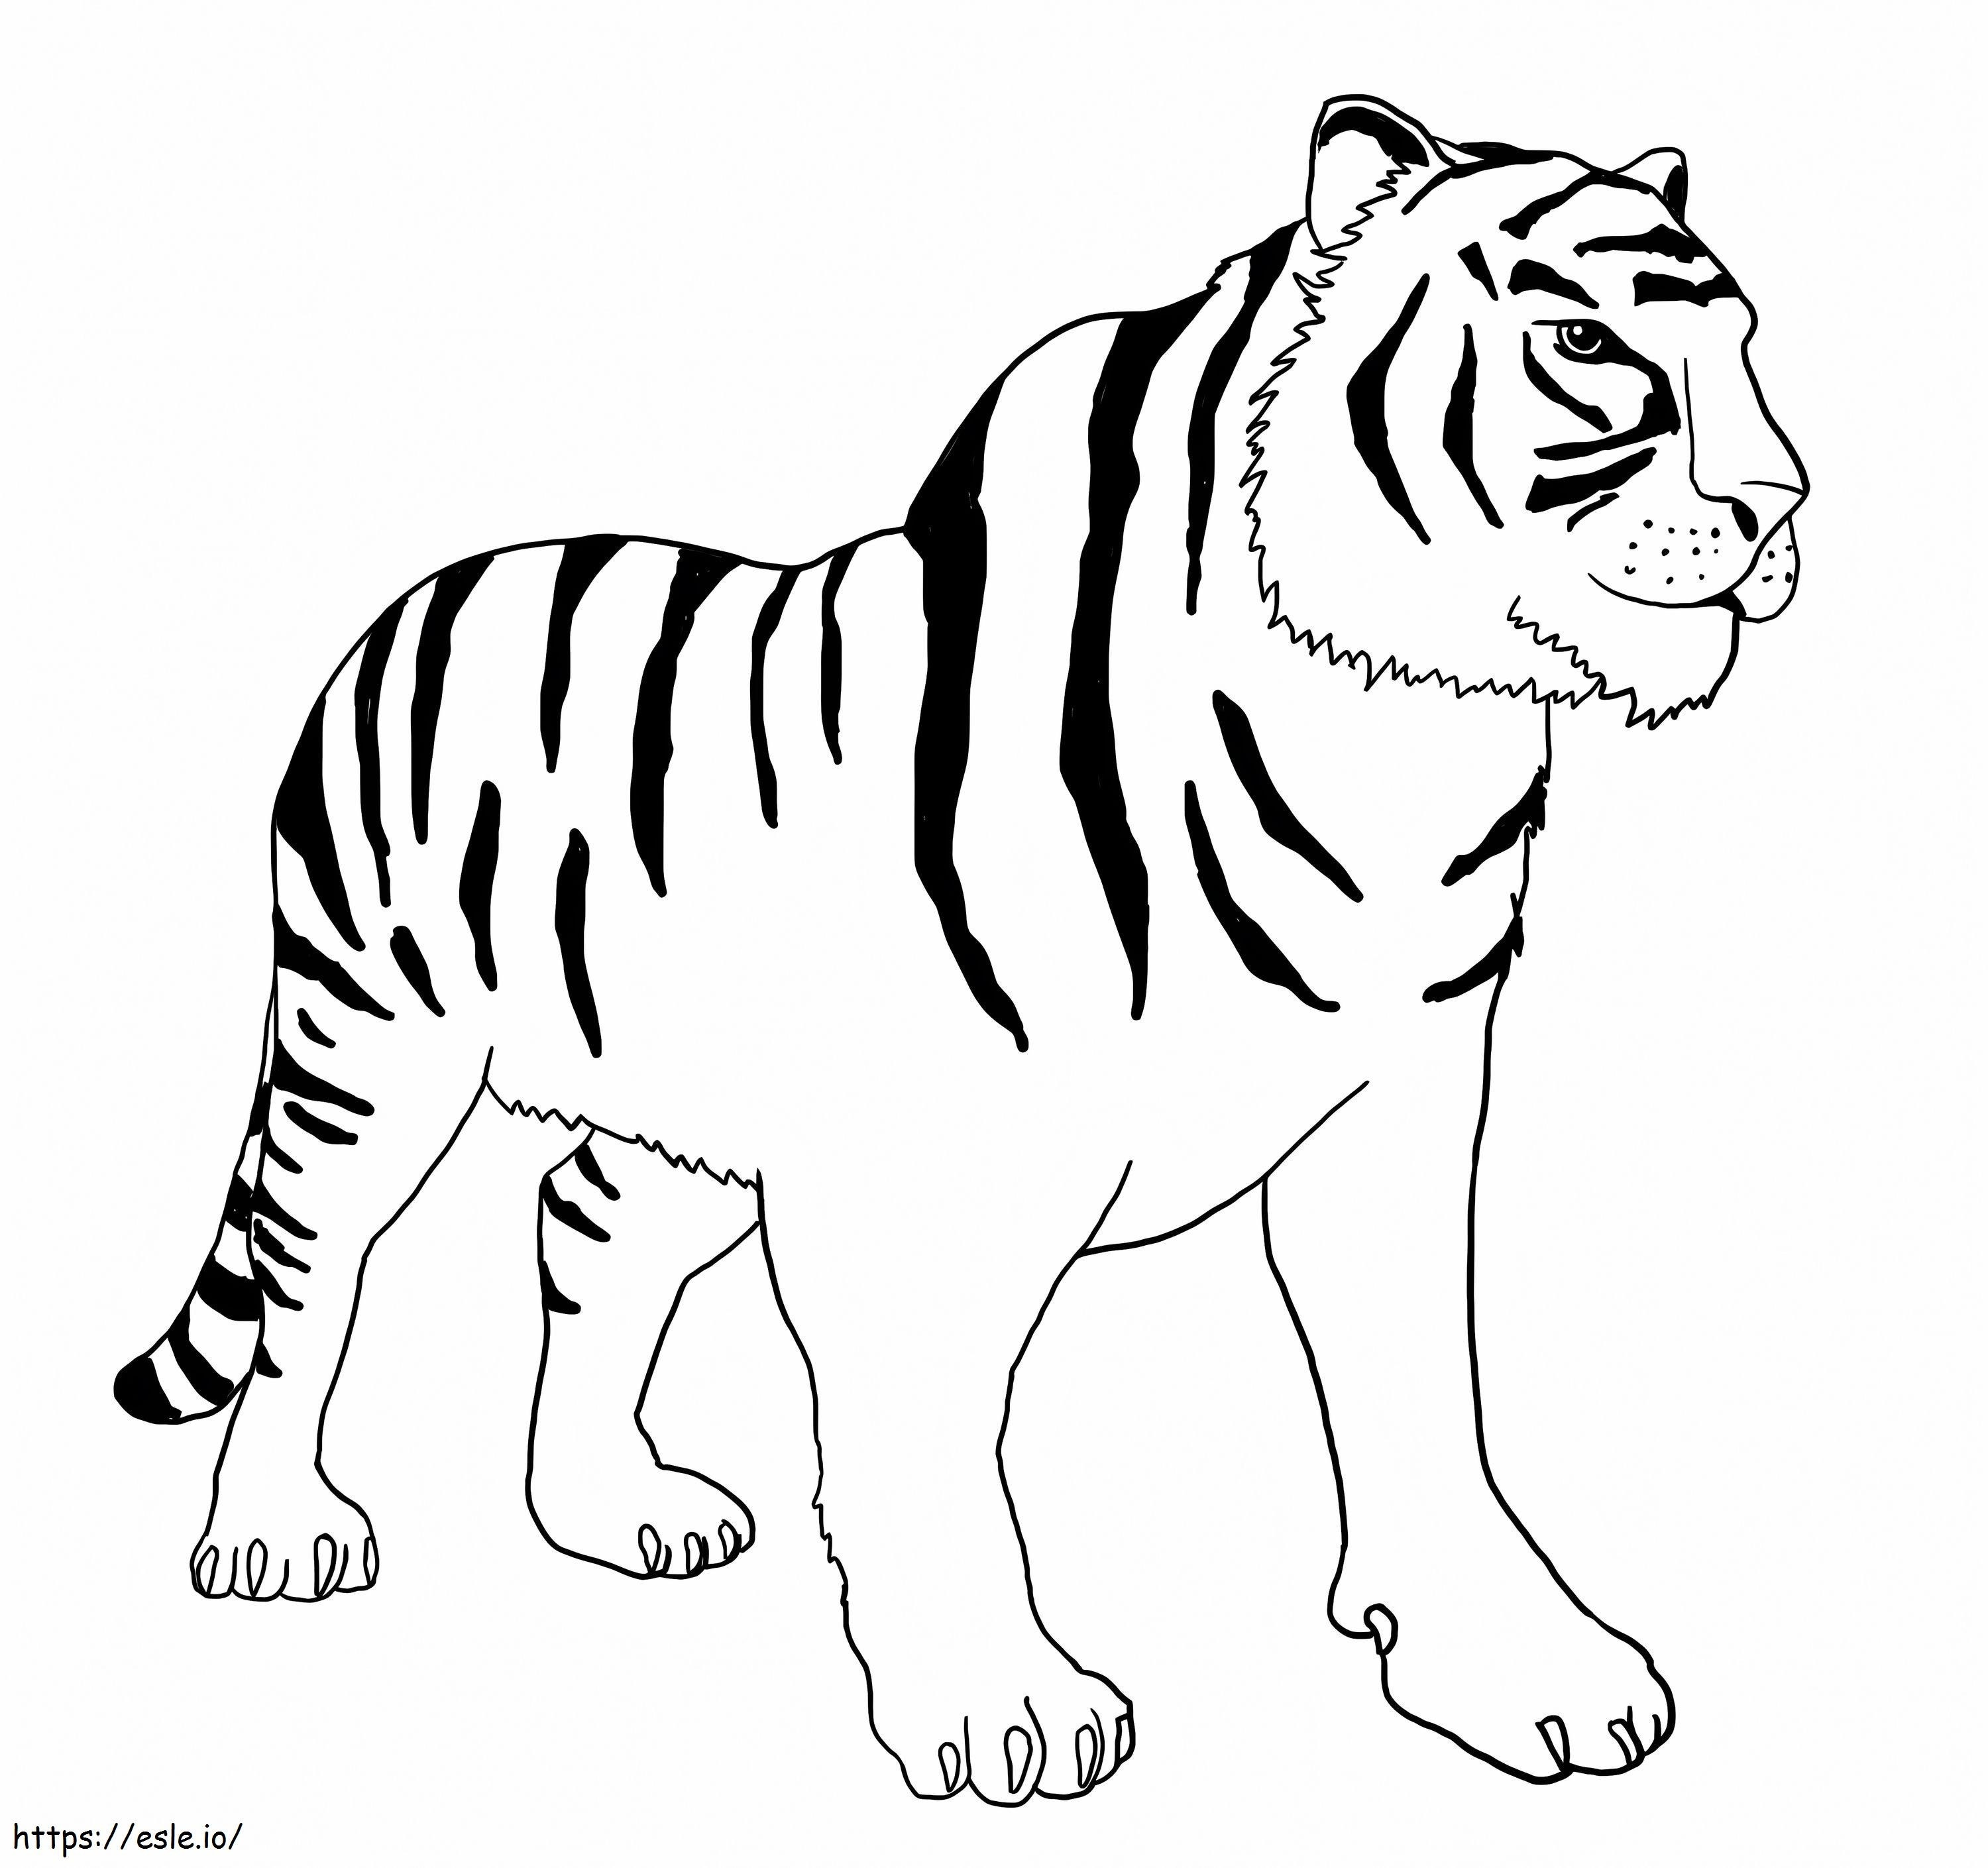 Standing Tiger coloring page